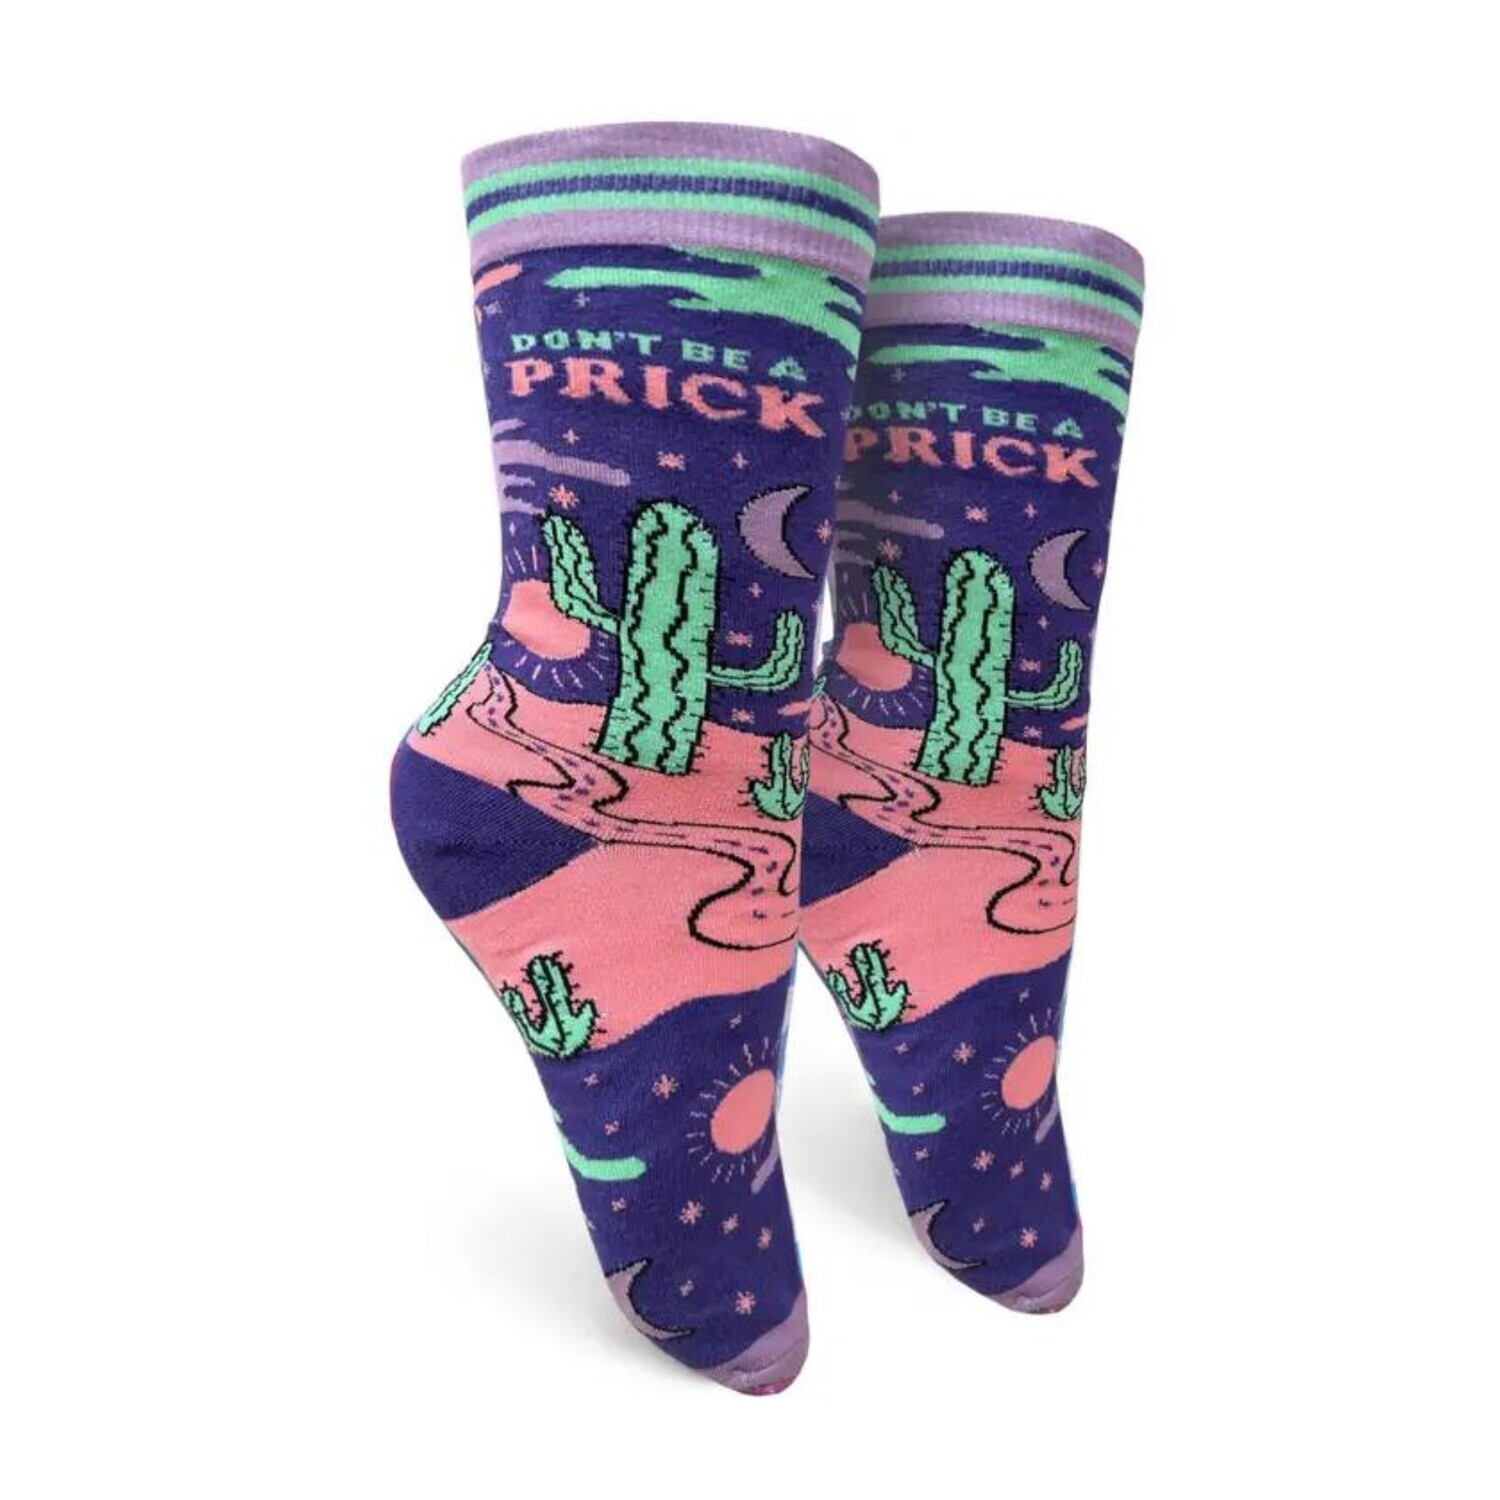 DON'T BE A PRICK WOMENS SOCK